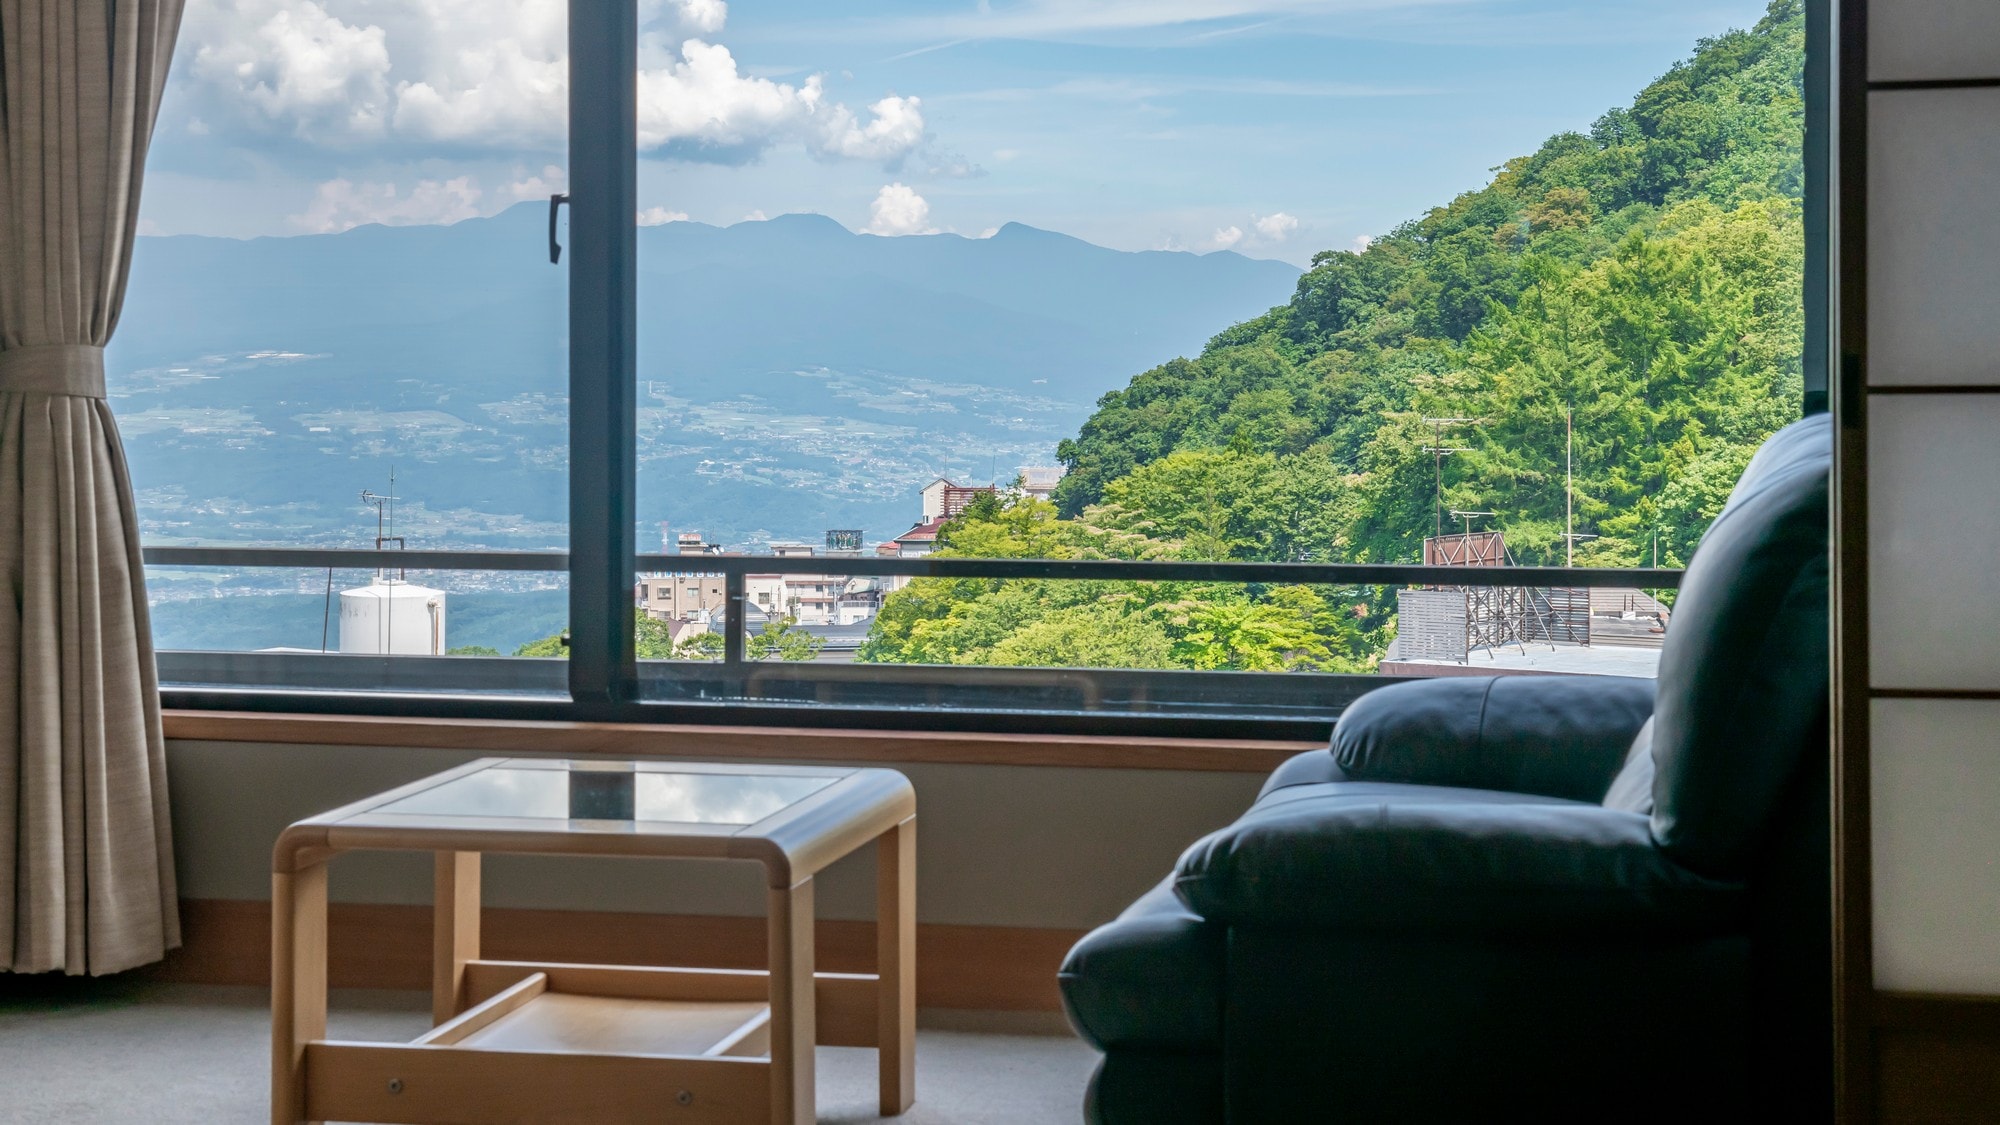 One of the features is the Japanese view from the room. Next room with room